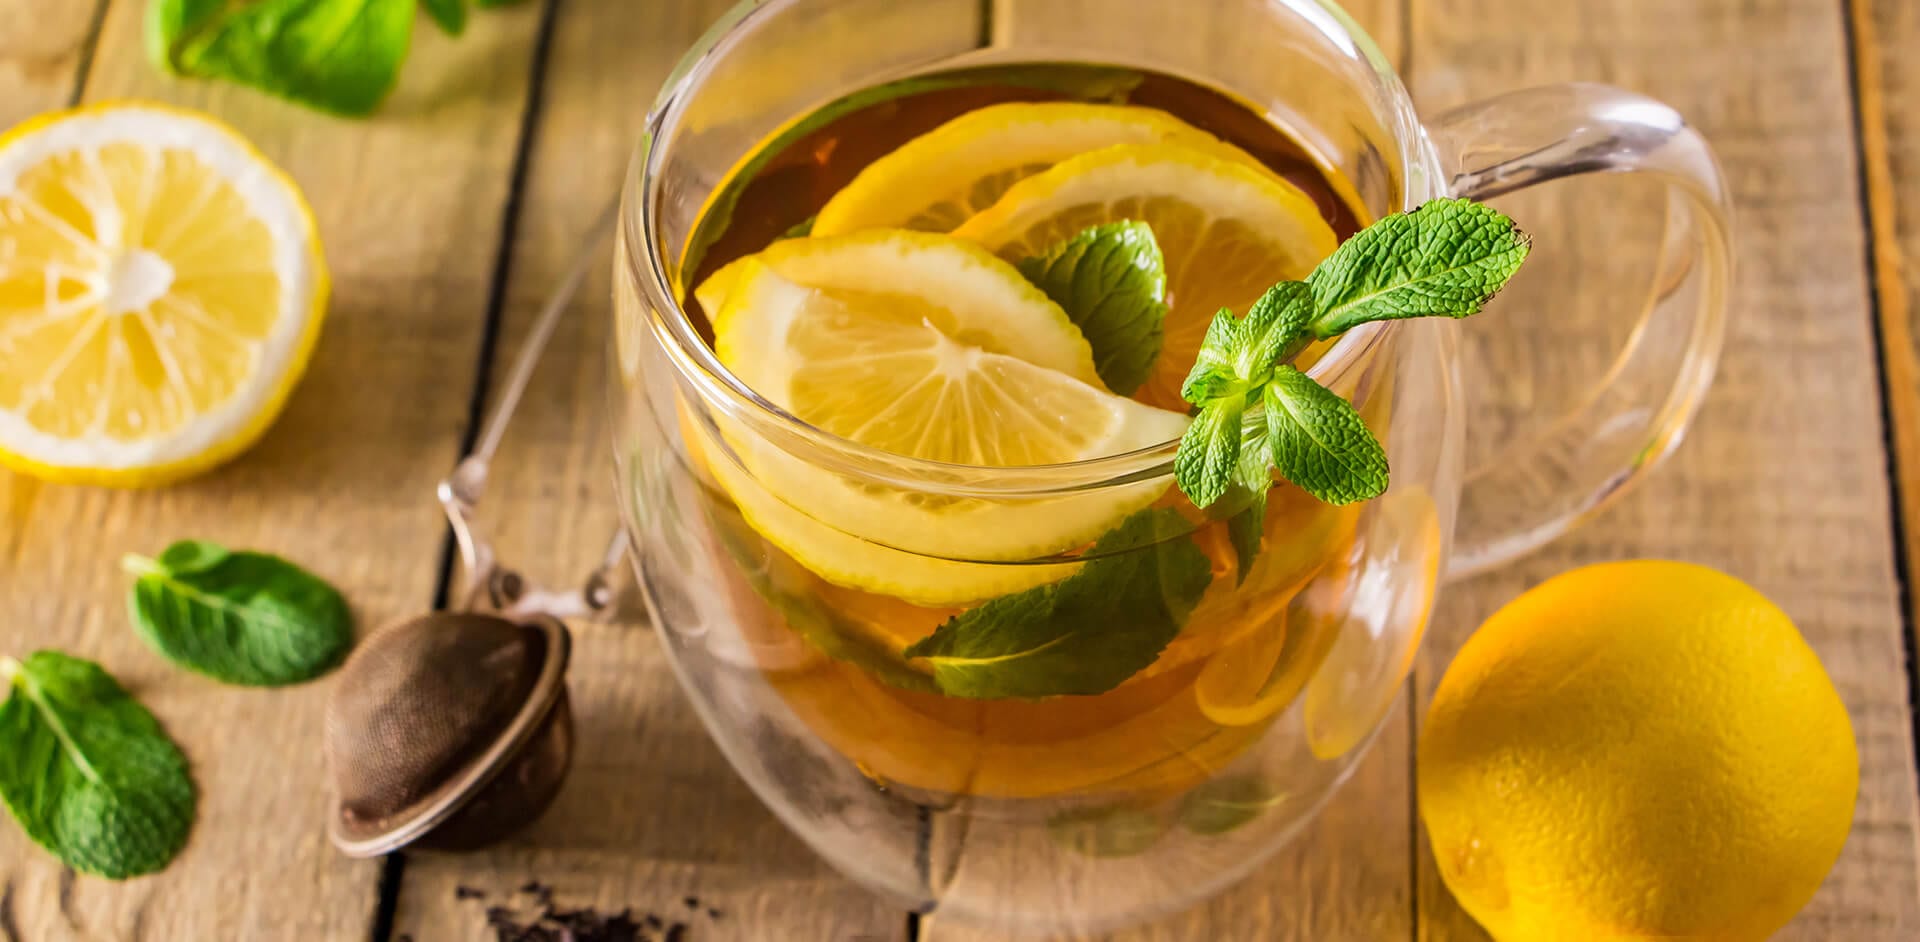 herbal-tea-with-lemon-and-mint-on-wooden-backgroun-PA3M6RN